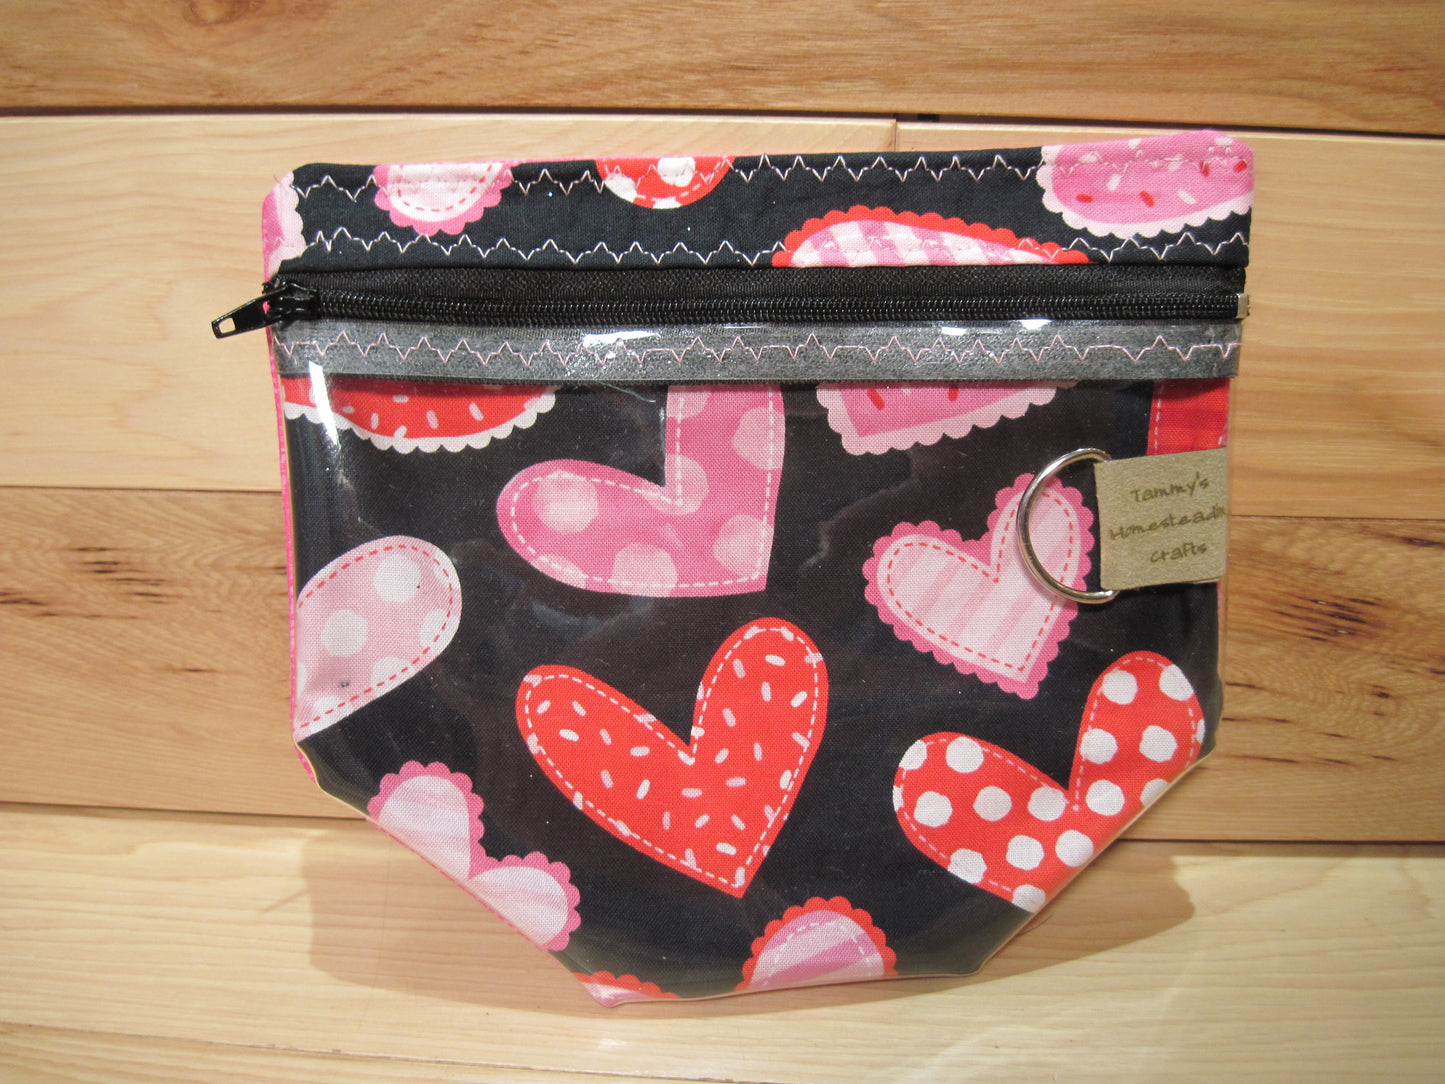 Notion's Bag Valentine's Day Hearts w/ hot pink